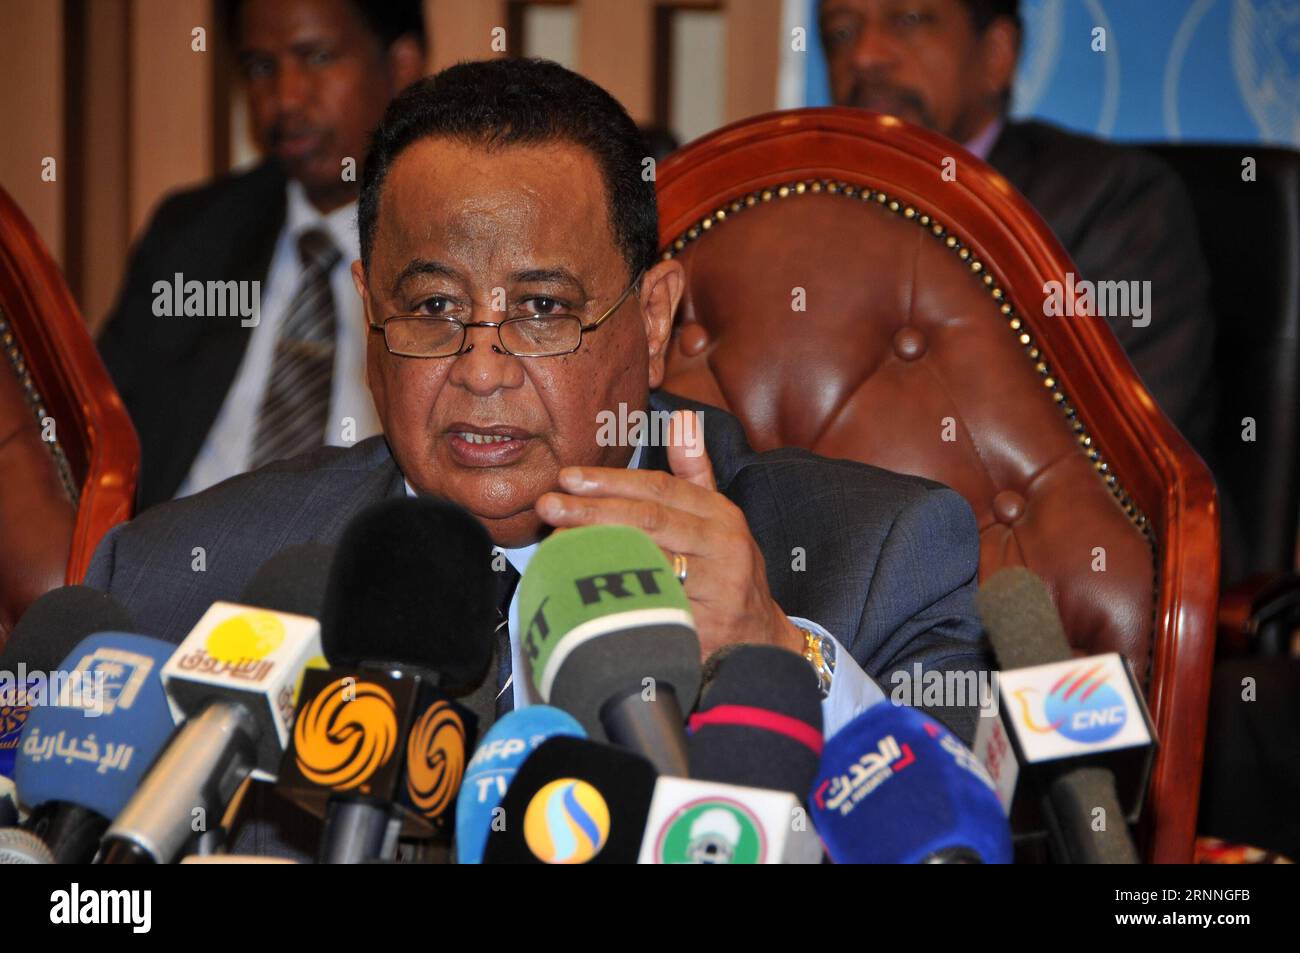 (170713) -- KHARTOUM, July 13, 2017 -- Sudan s Foreign Minister Ibrahim Ghandour speaks at a press conference in Khartoum, Sudan, on July 13, 2017. Sudan s government on Thursday said it will stick to cooperation with U.S. even after suspending a negotiation committee set up to negotiate relief from U.S. sanctions. ) SUDAN-KHARTOUM-U.S.-COOPERATION DESPITE SANCTIONS MohamedxBabiker PUBLICATIONxNOTxINxCHN   170713 Khartoum July 13 2017 Sudan S Foreign Ministers Ibrahim Ghandour Speaks AT a Press Conference in Khartoum Sudan ON July 13 2017 Sudan S Government ON Thursday Said IT will Stick to Co Stock Photo